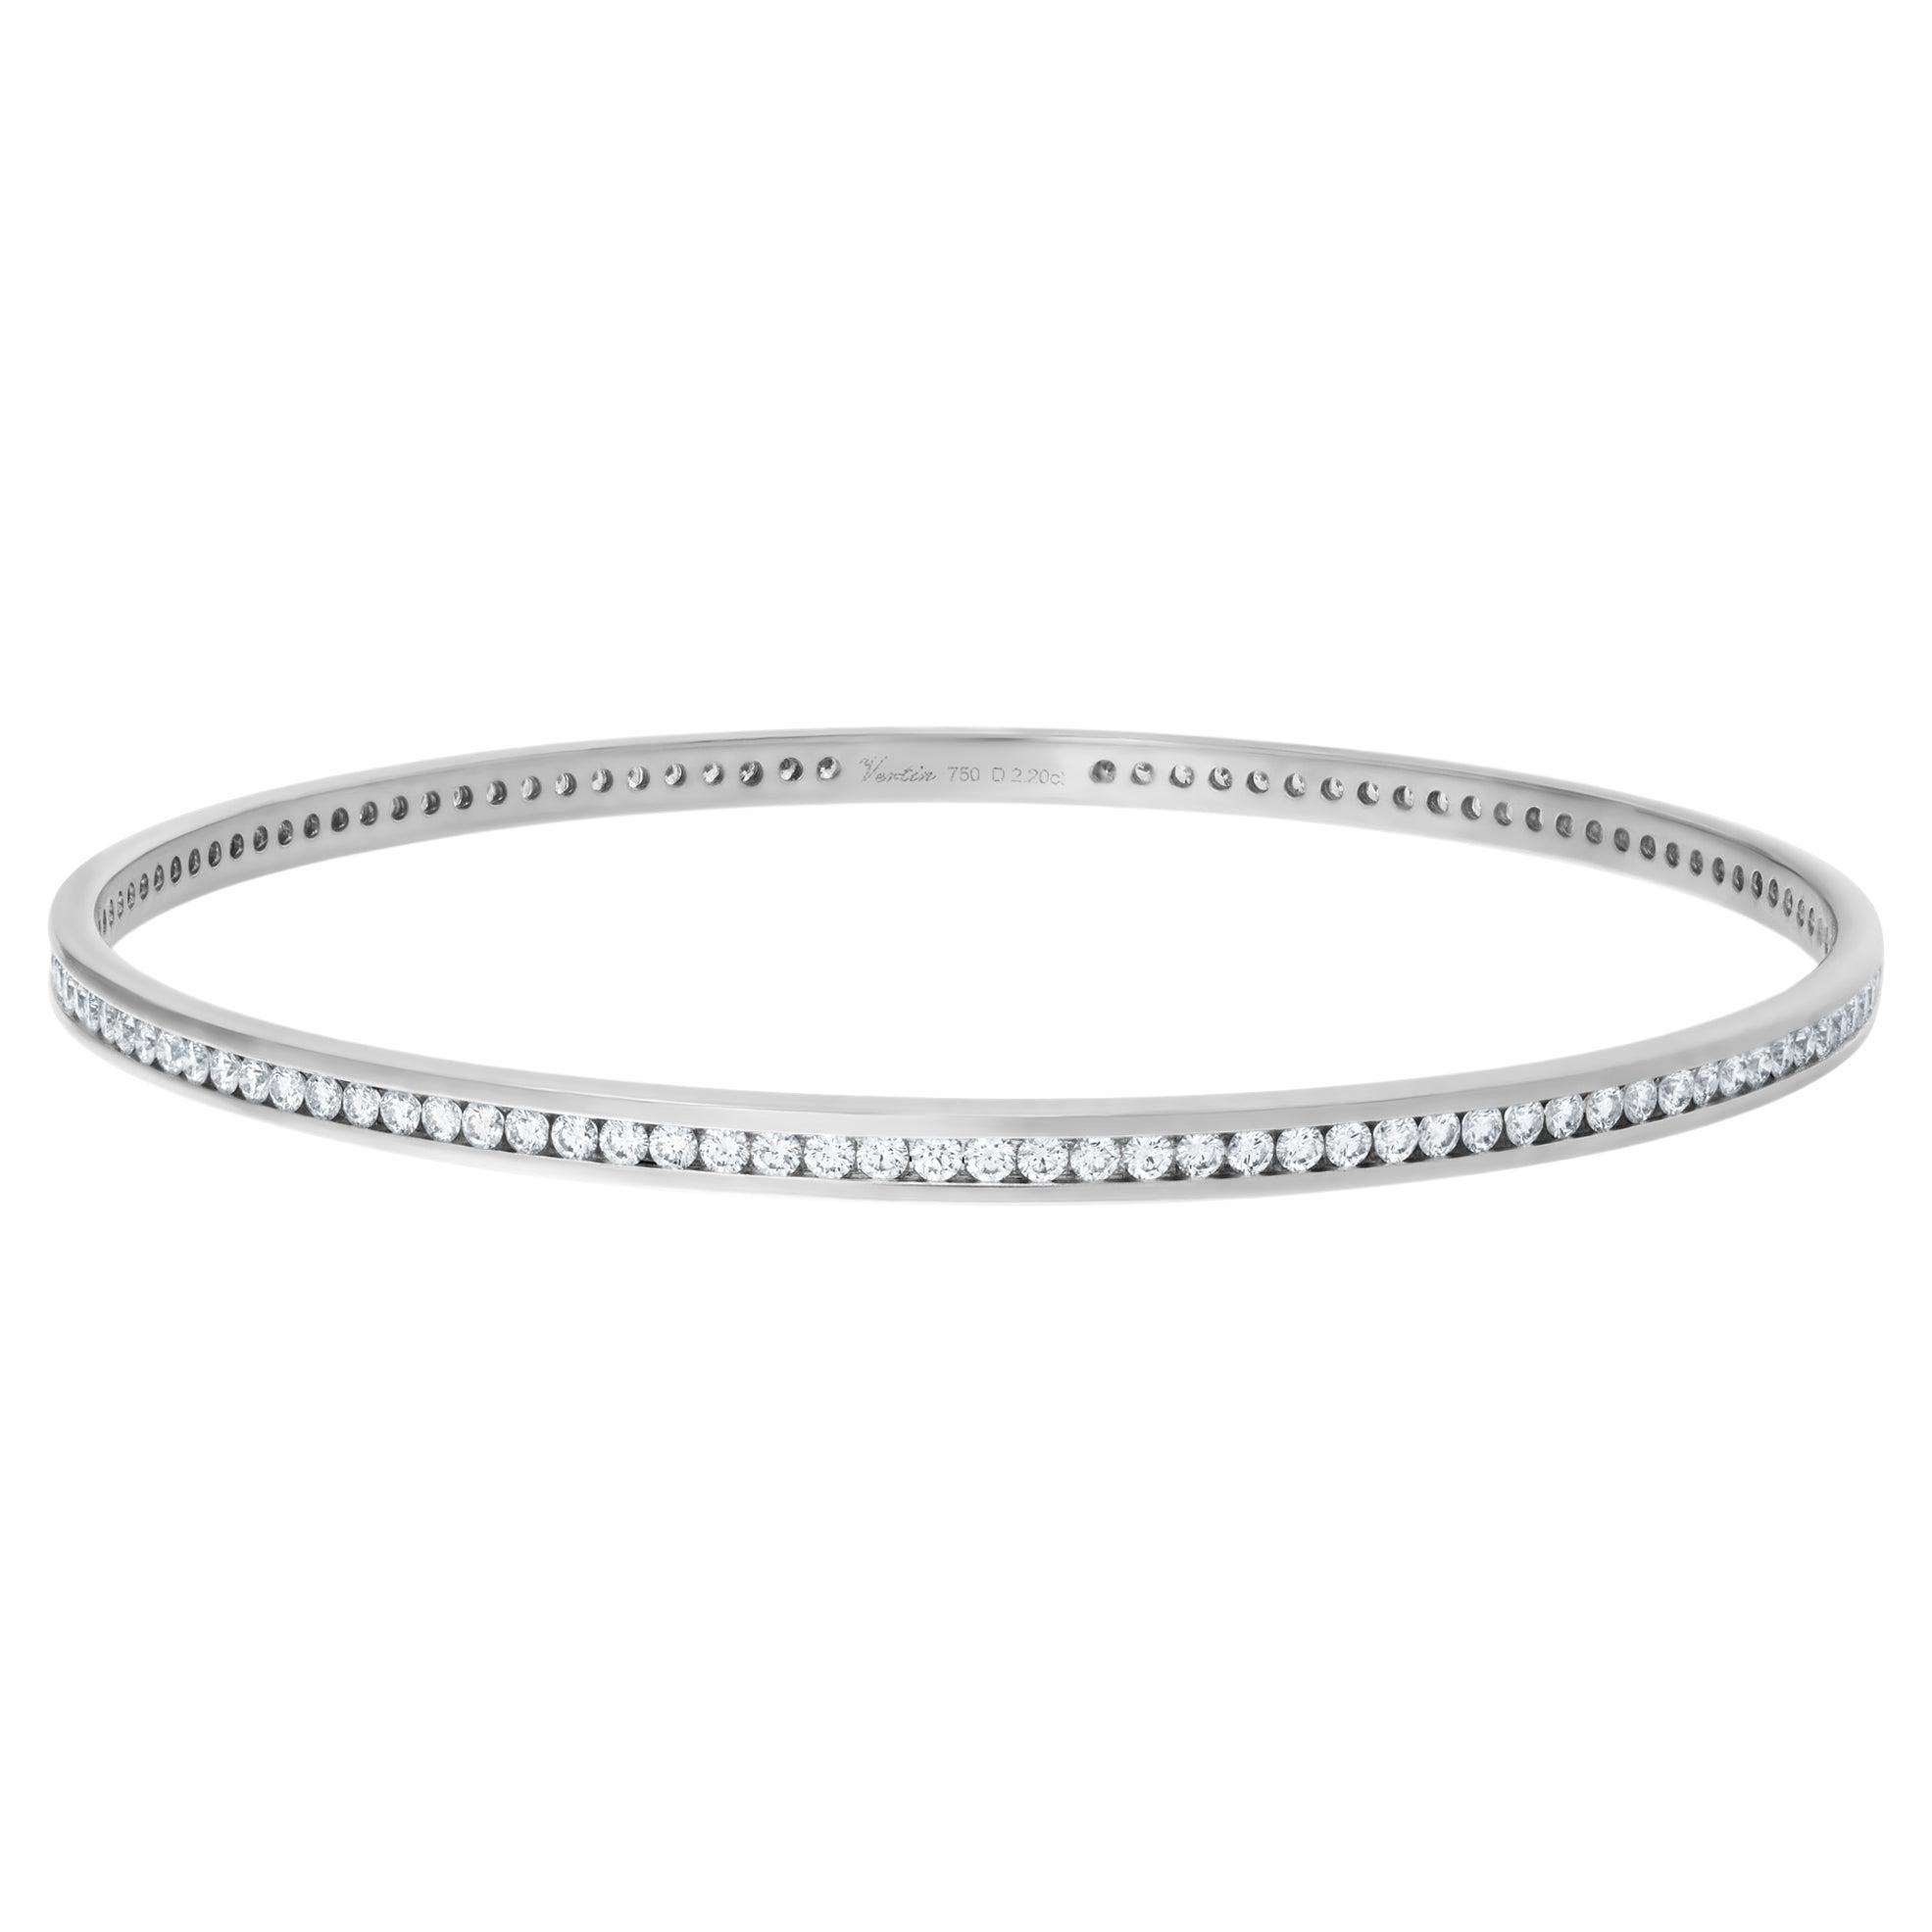 Eternity diamond bangle in white gold signed 'Vertin' with diamonds For Sale